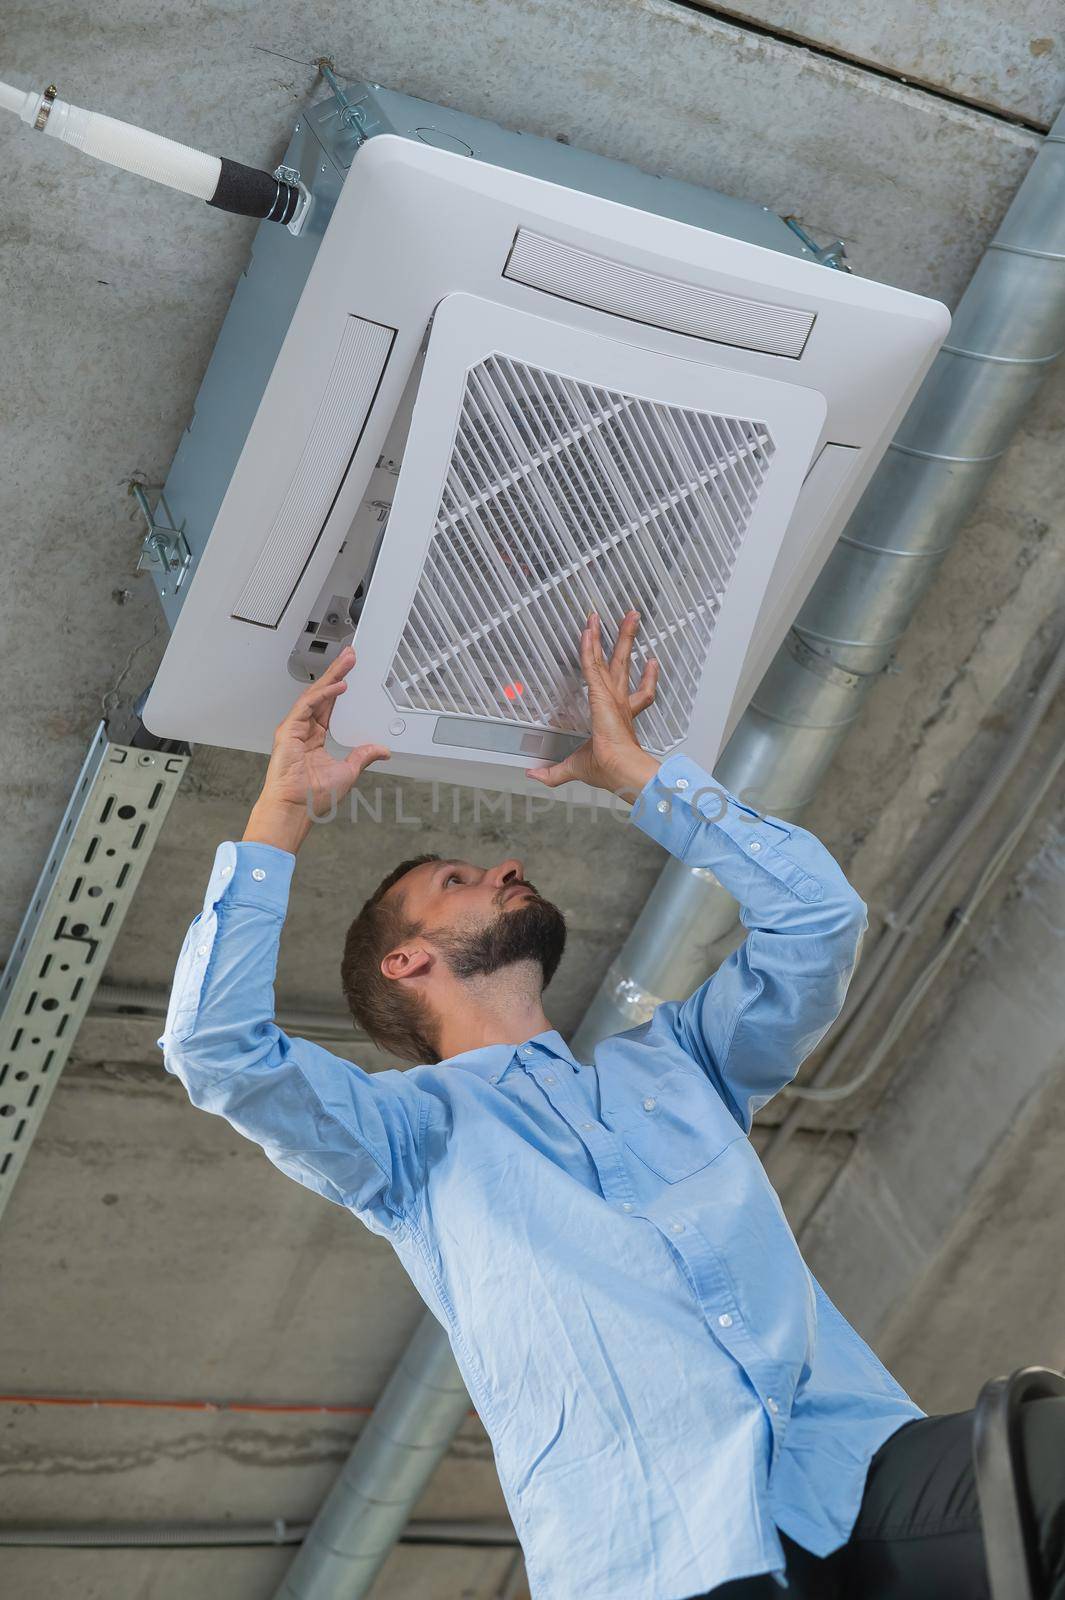 Caucasian bearded man repairing the air conditioner in the office